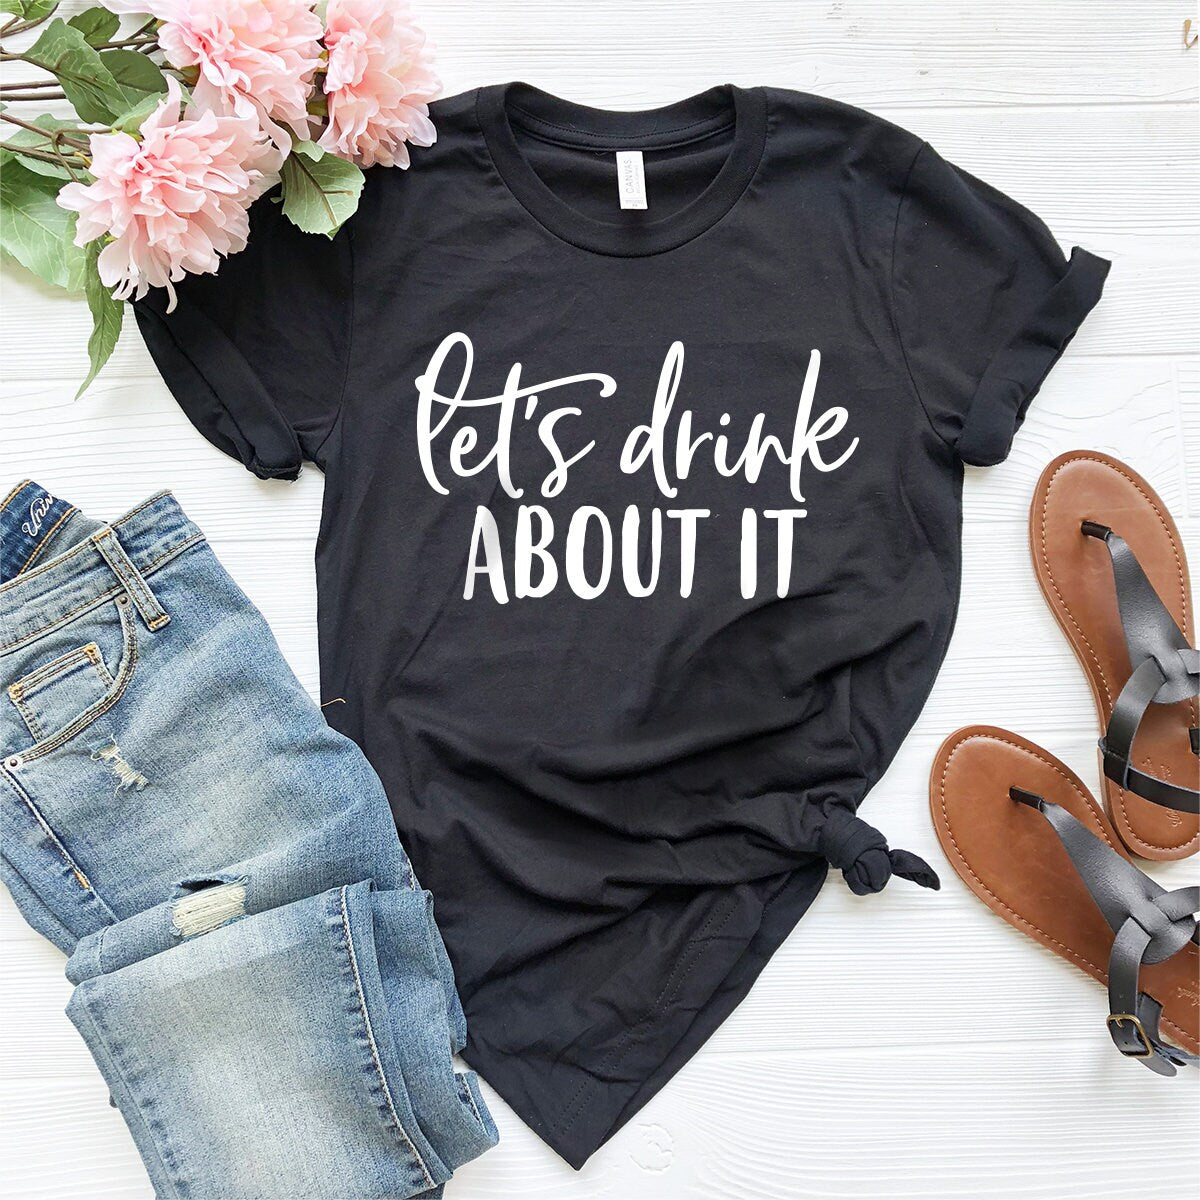 Funny Drinking Shirt, Day Drinking Shirt, Funny Alcoholic Shirt, Lets Drink About It Tee, Funny Women Shirt, Drinking Party  Shirt - Fastdeliverytees.com